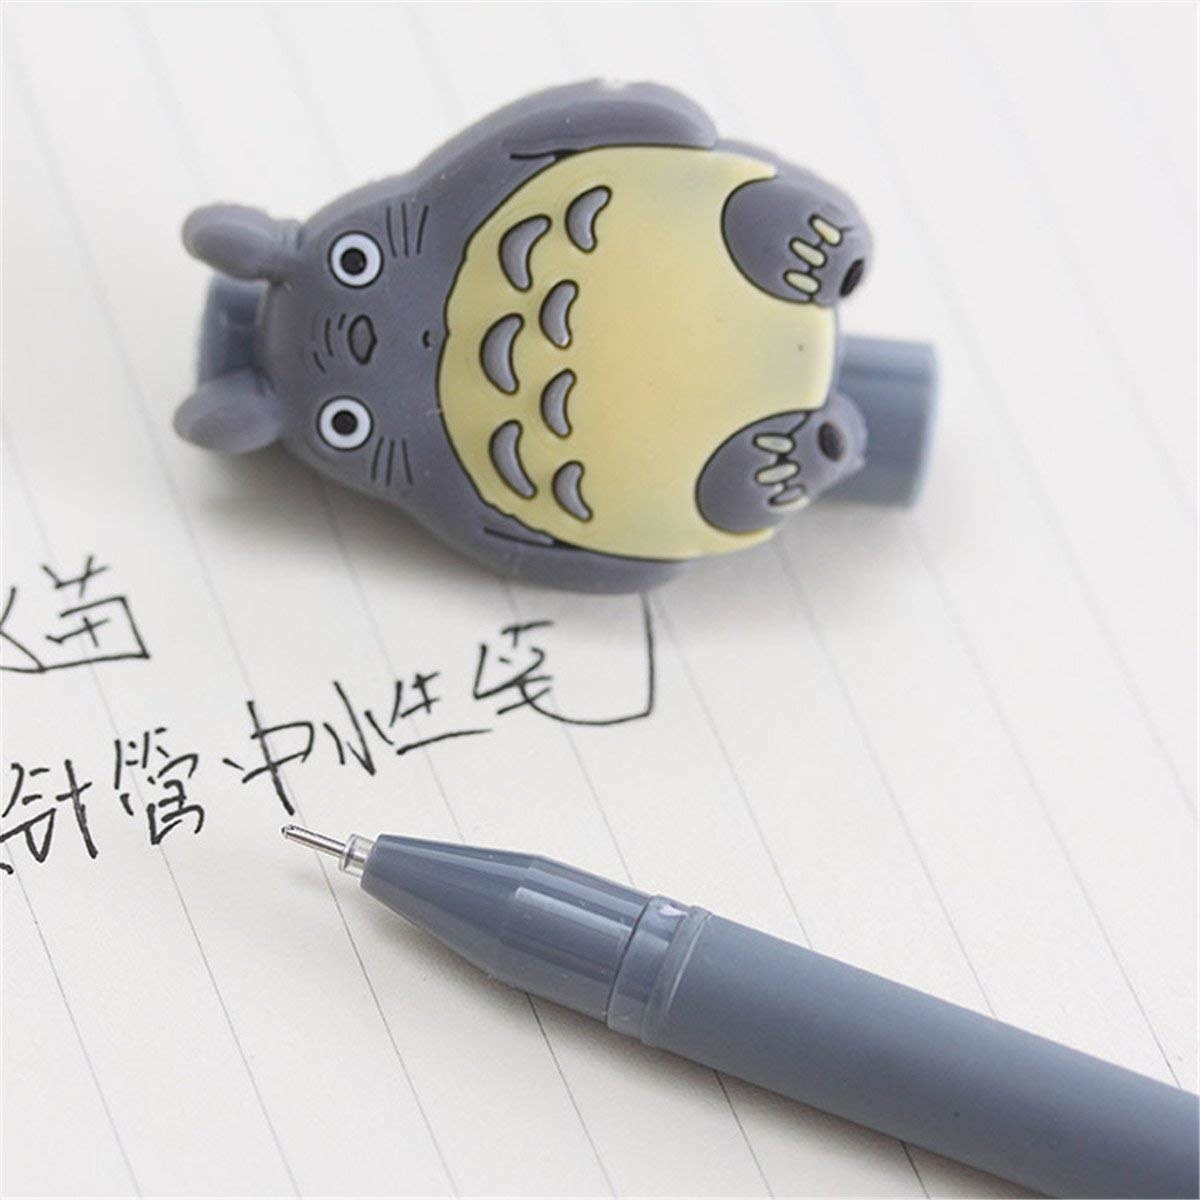 Wrench Tool Ballpoint Pen Novelty School Office Gift Kid Toy Cute StationeryCG$ 